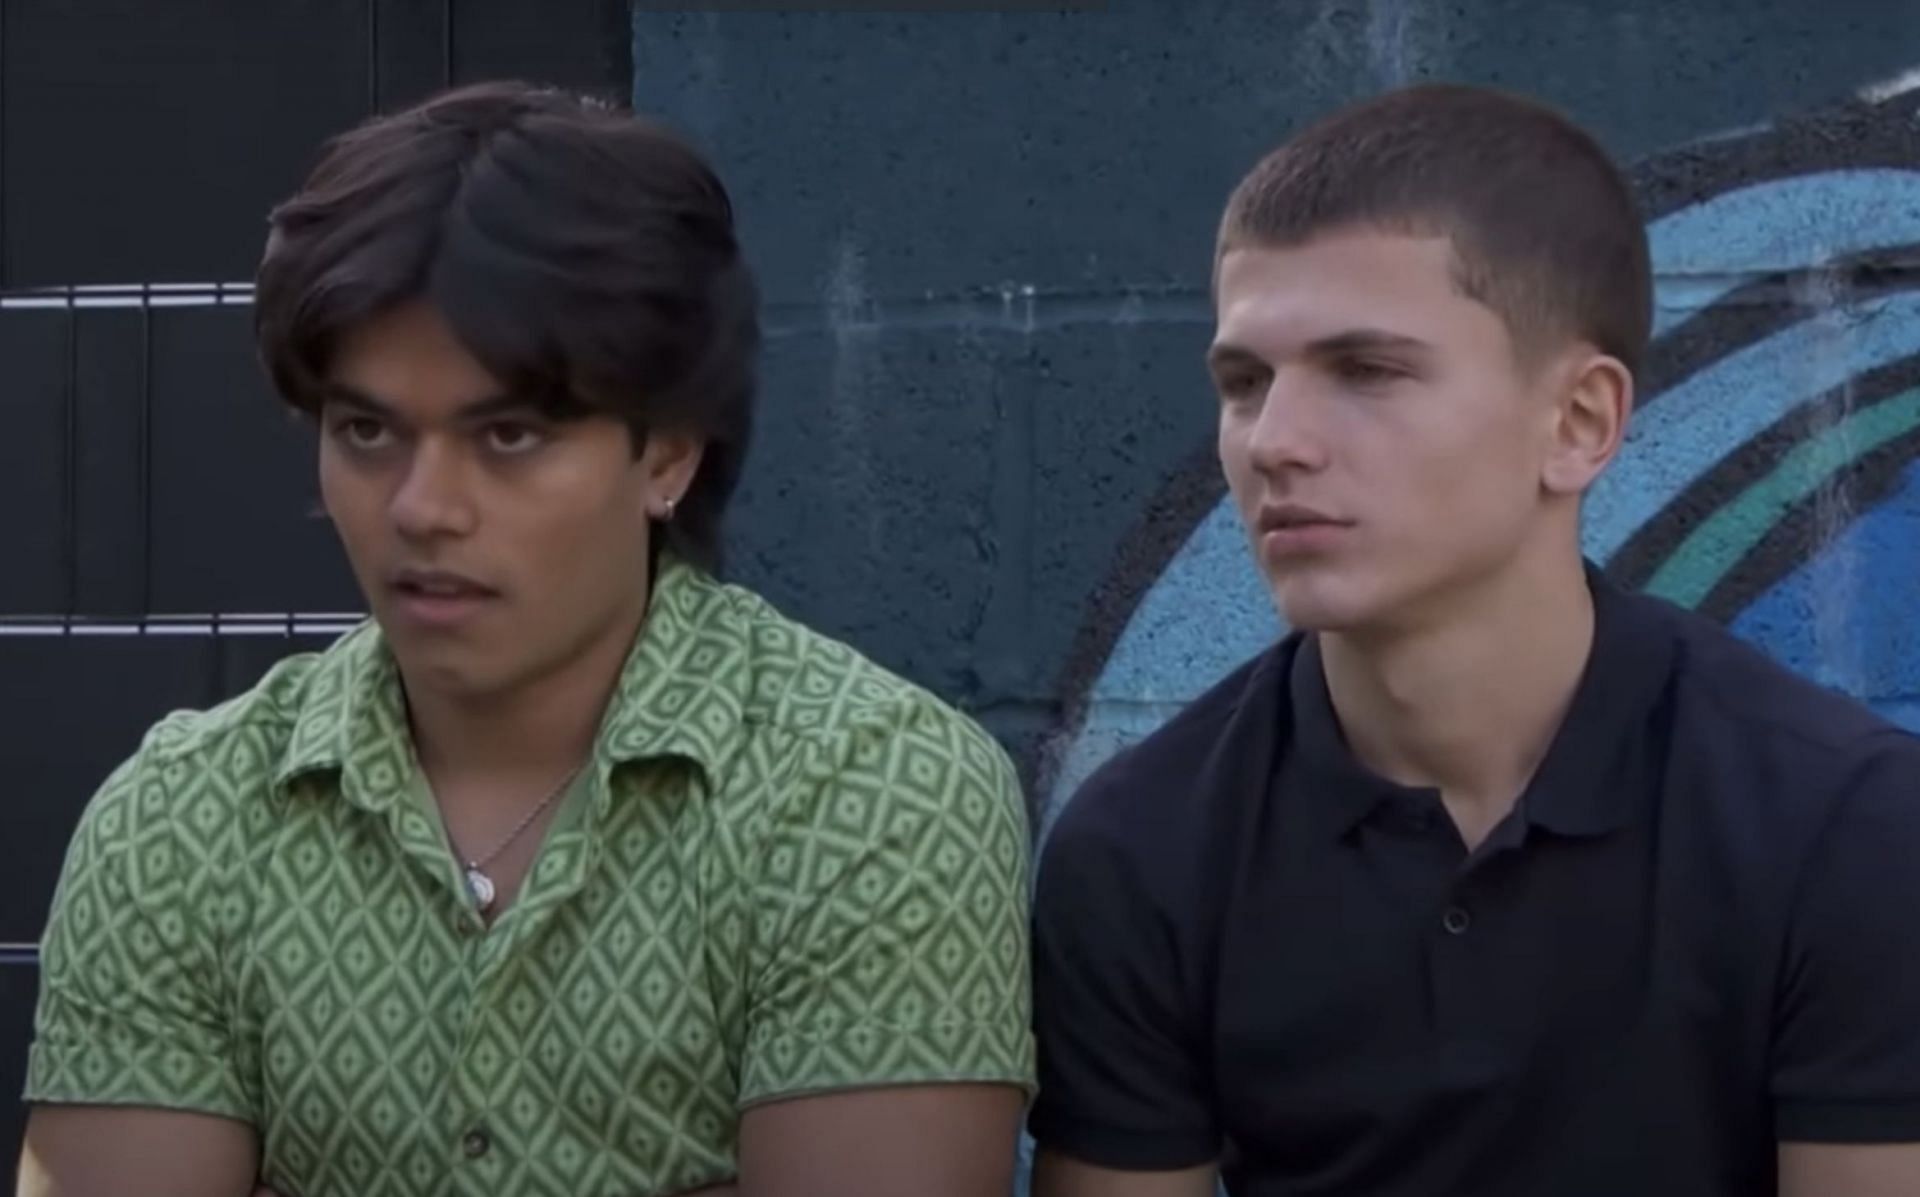 A still of Dillon (left) and Lucas (right) from the show. (Image via Channel 4)